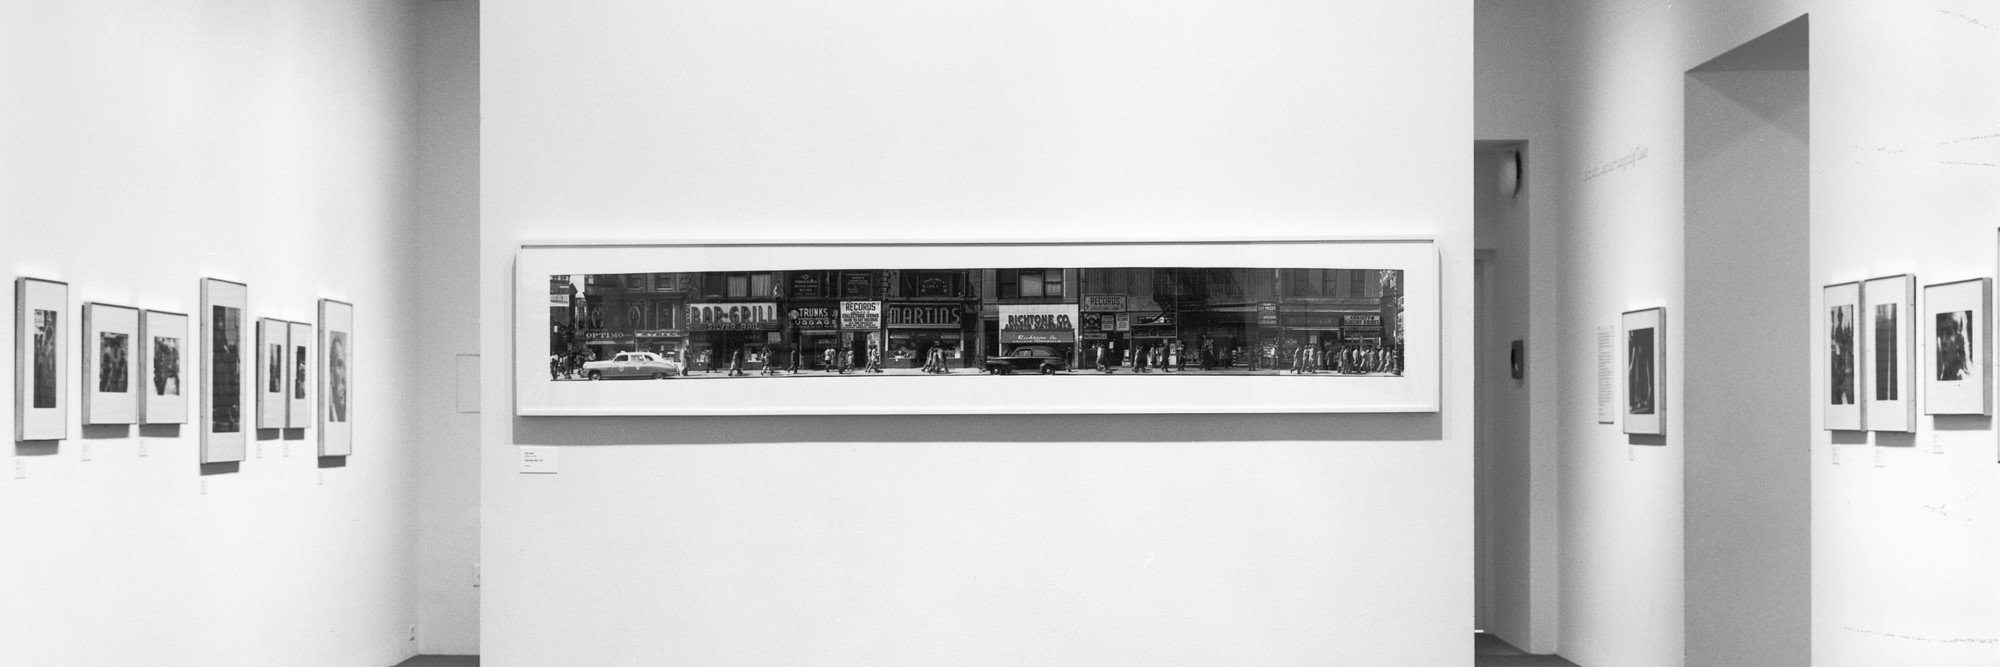 Installation view of Mean Streets: American Photography from the Collection, 1940s–1980s at The Museum of Modern Art, New York. Photo: Katherine Keller